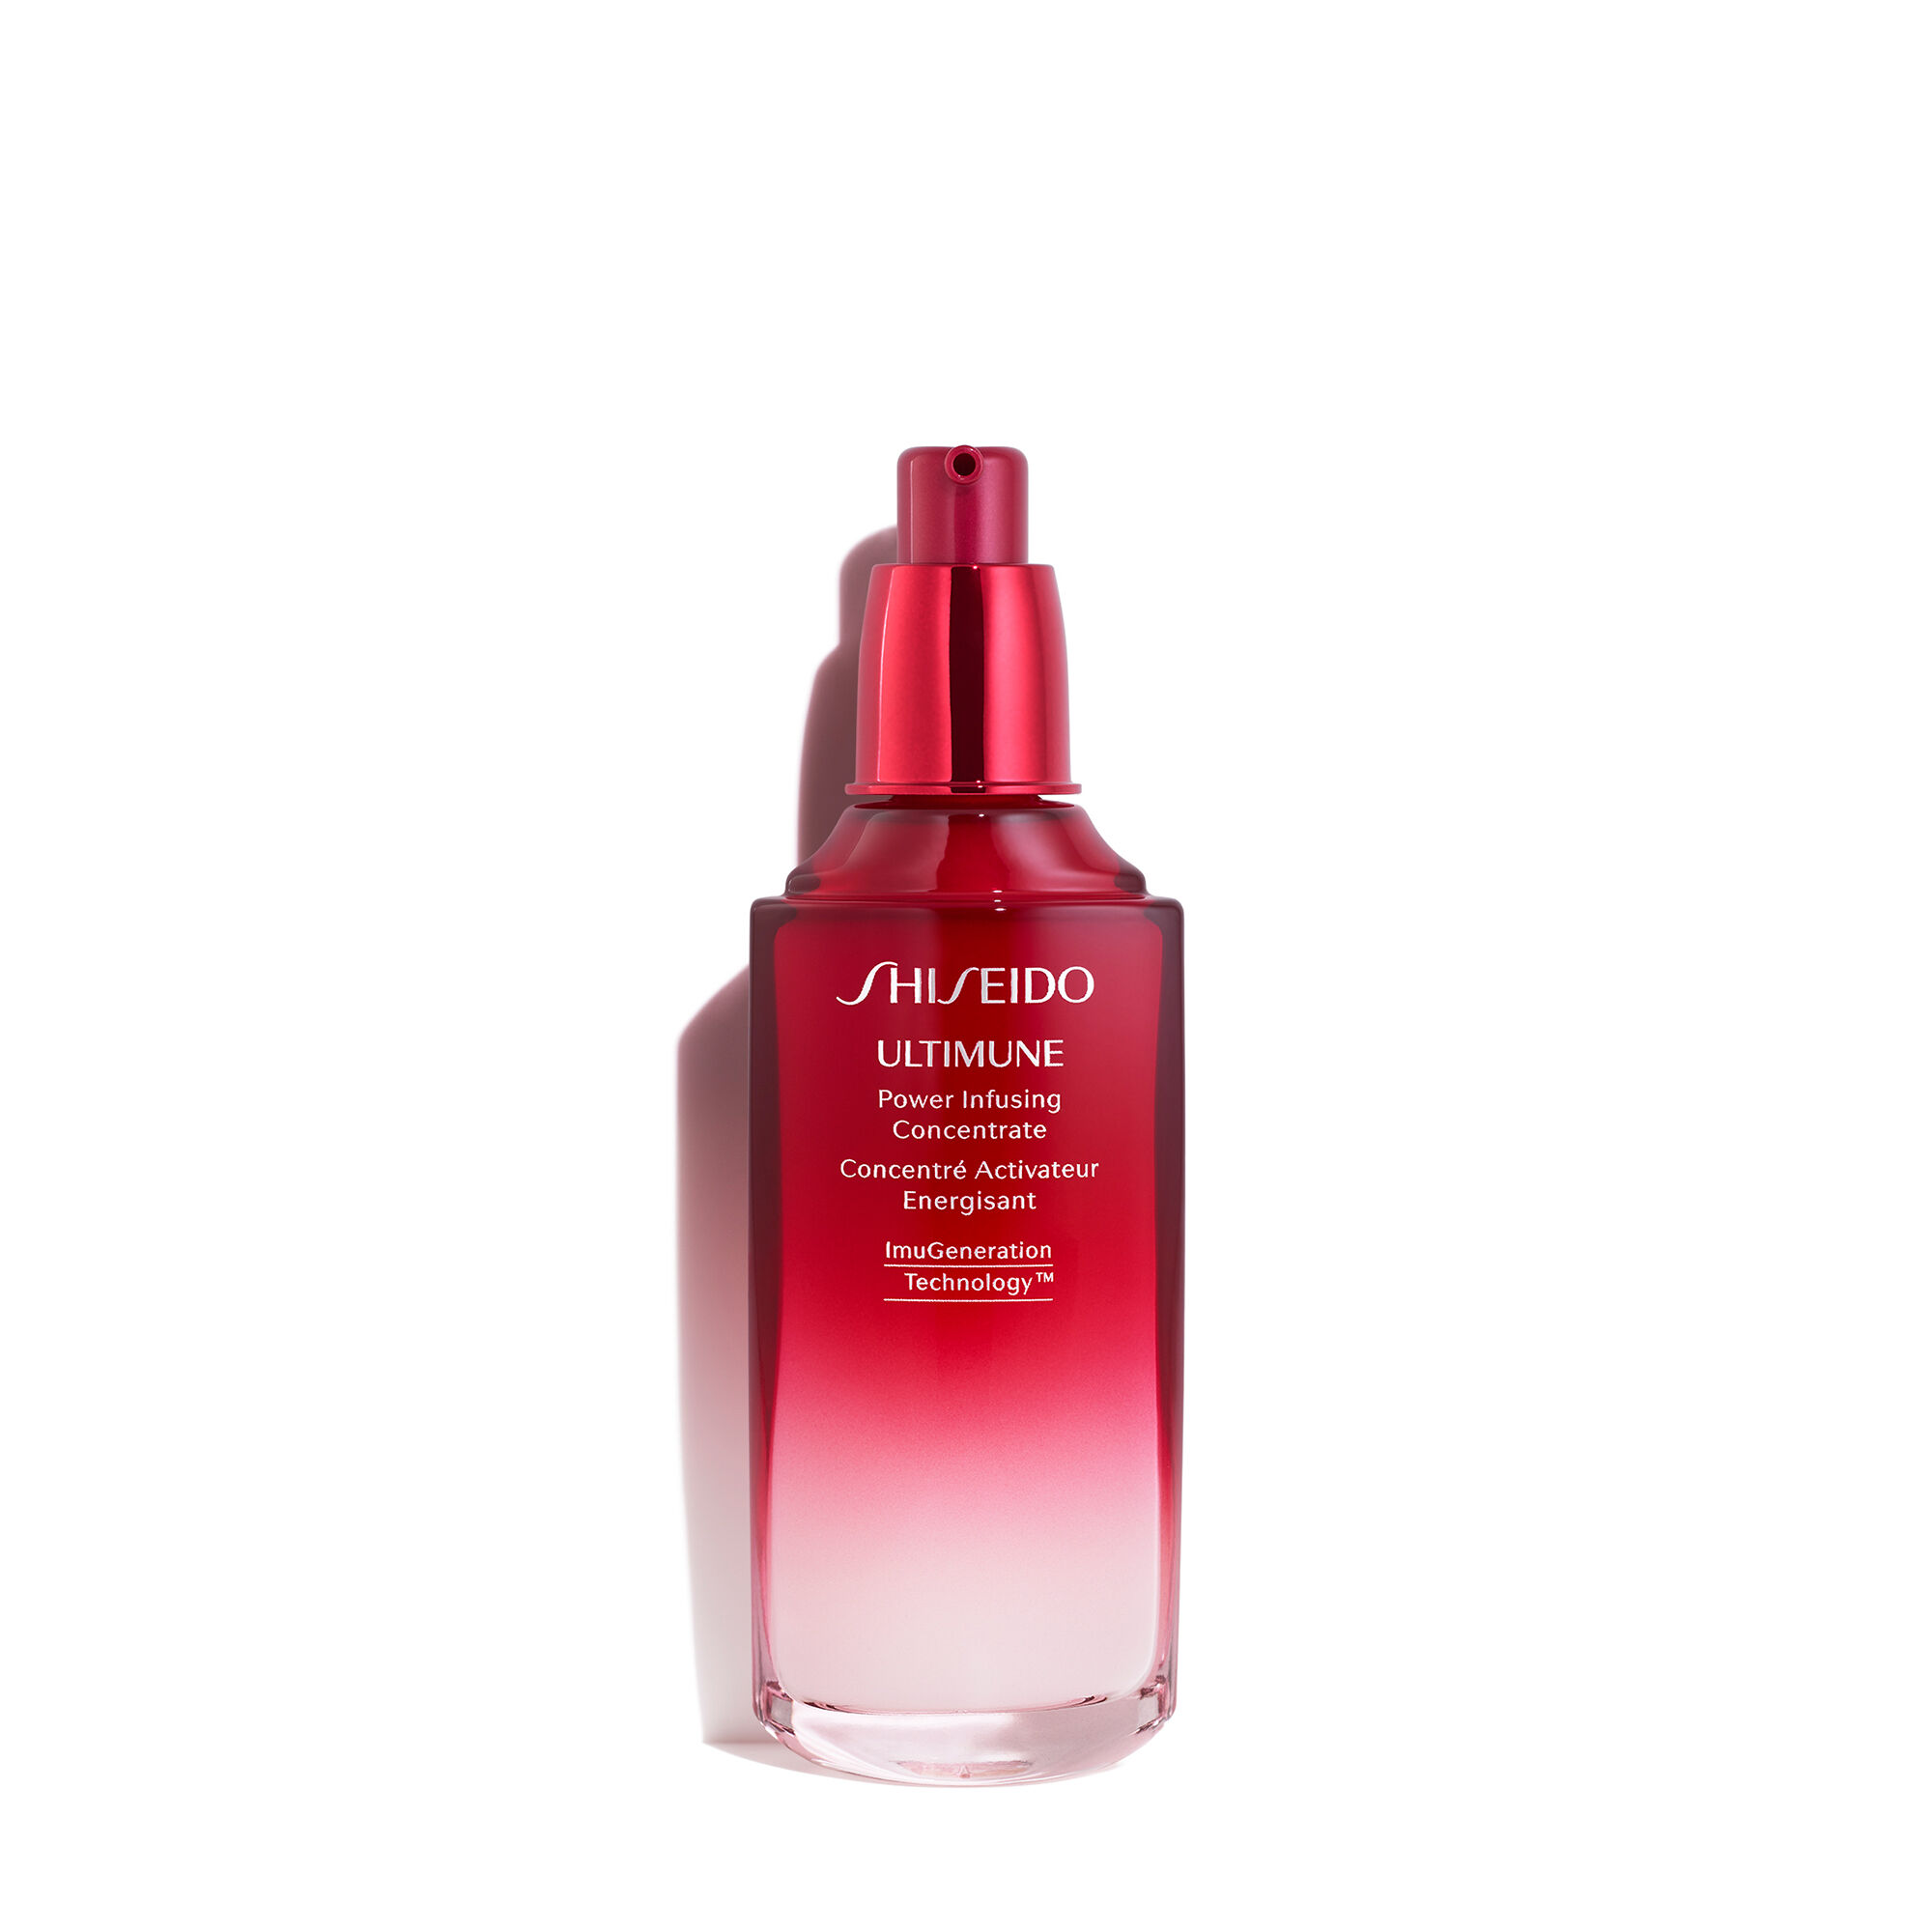 Shiseido ultimune power infusing concentrate. Концентрат Shiseido Ultimune Power infusing Concentrate. Шисейдо сыворотка для лица. Шисейдо Essential Energy Eye Definer. Концентрат для лица Shiseido Ultimune.